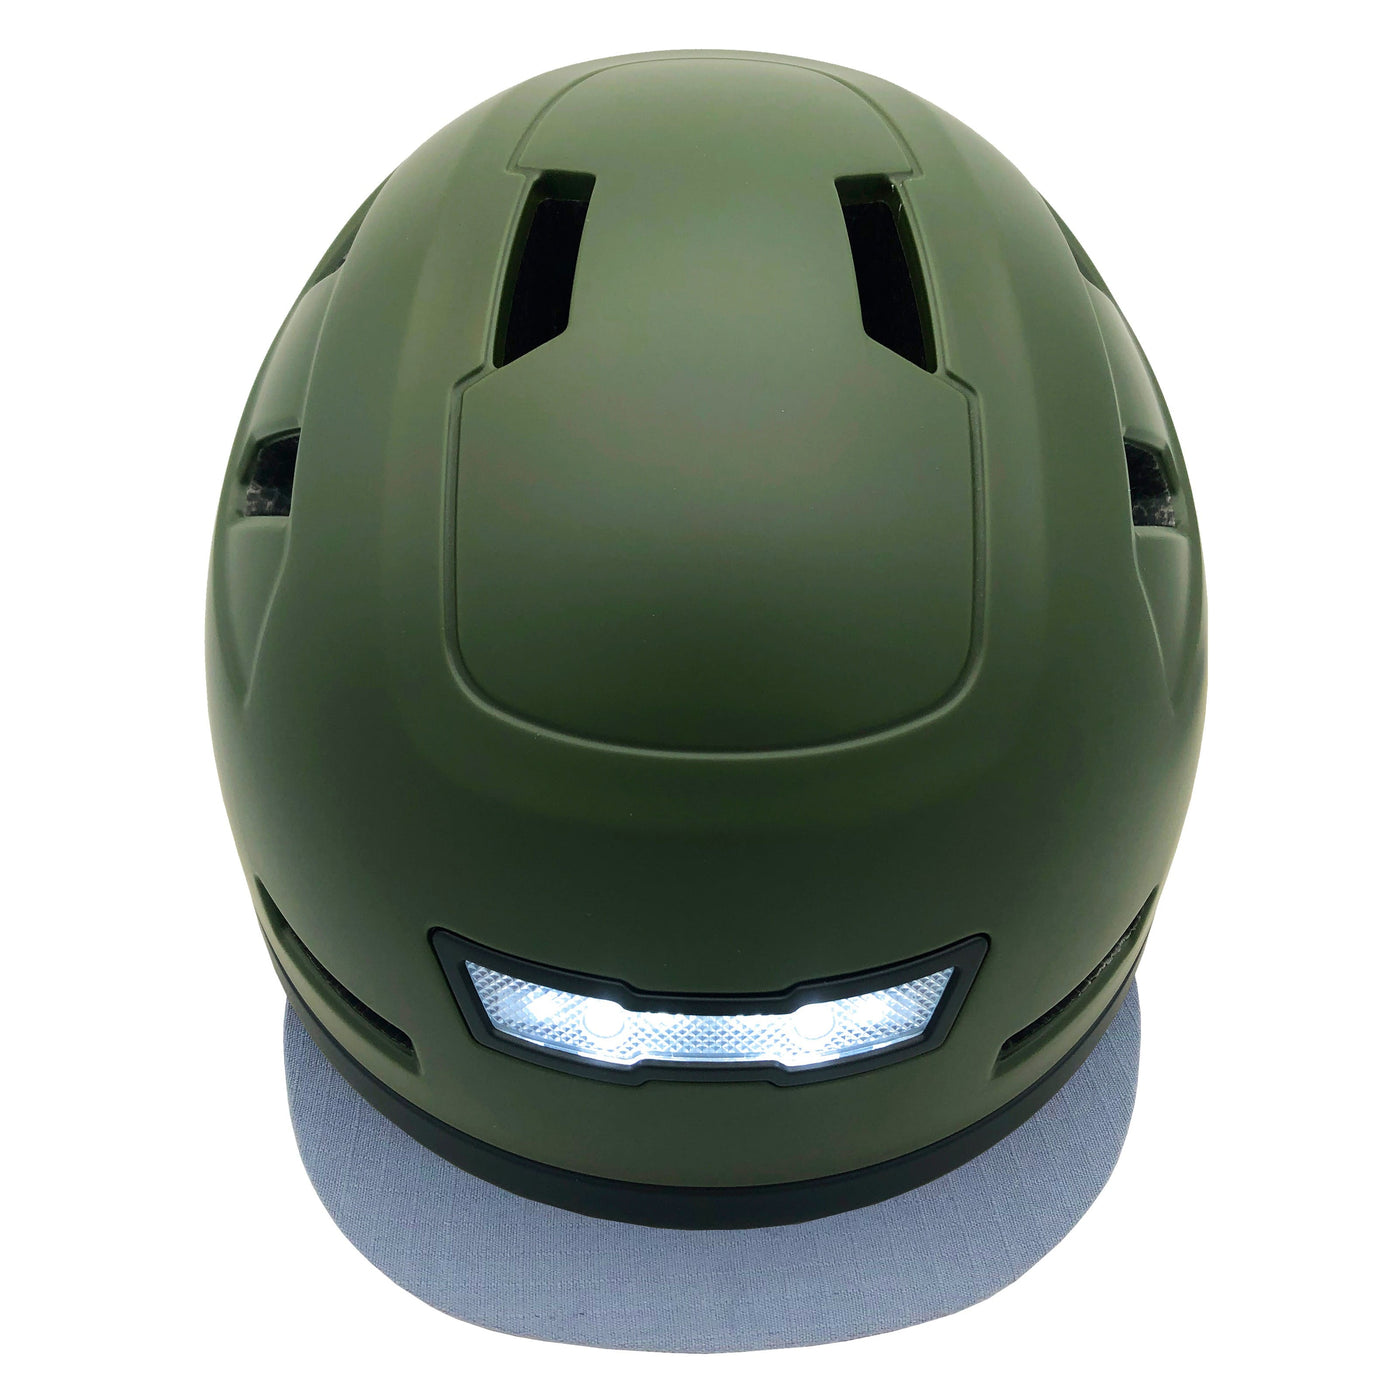 front view of moss xnito ebike helmet showing light and visor